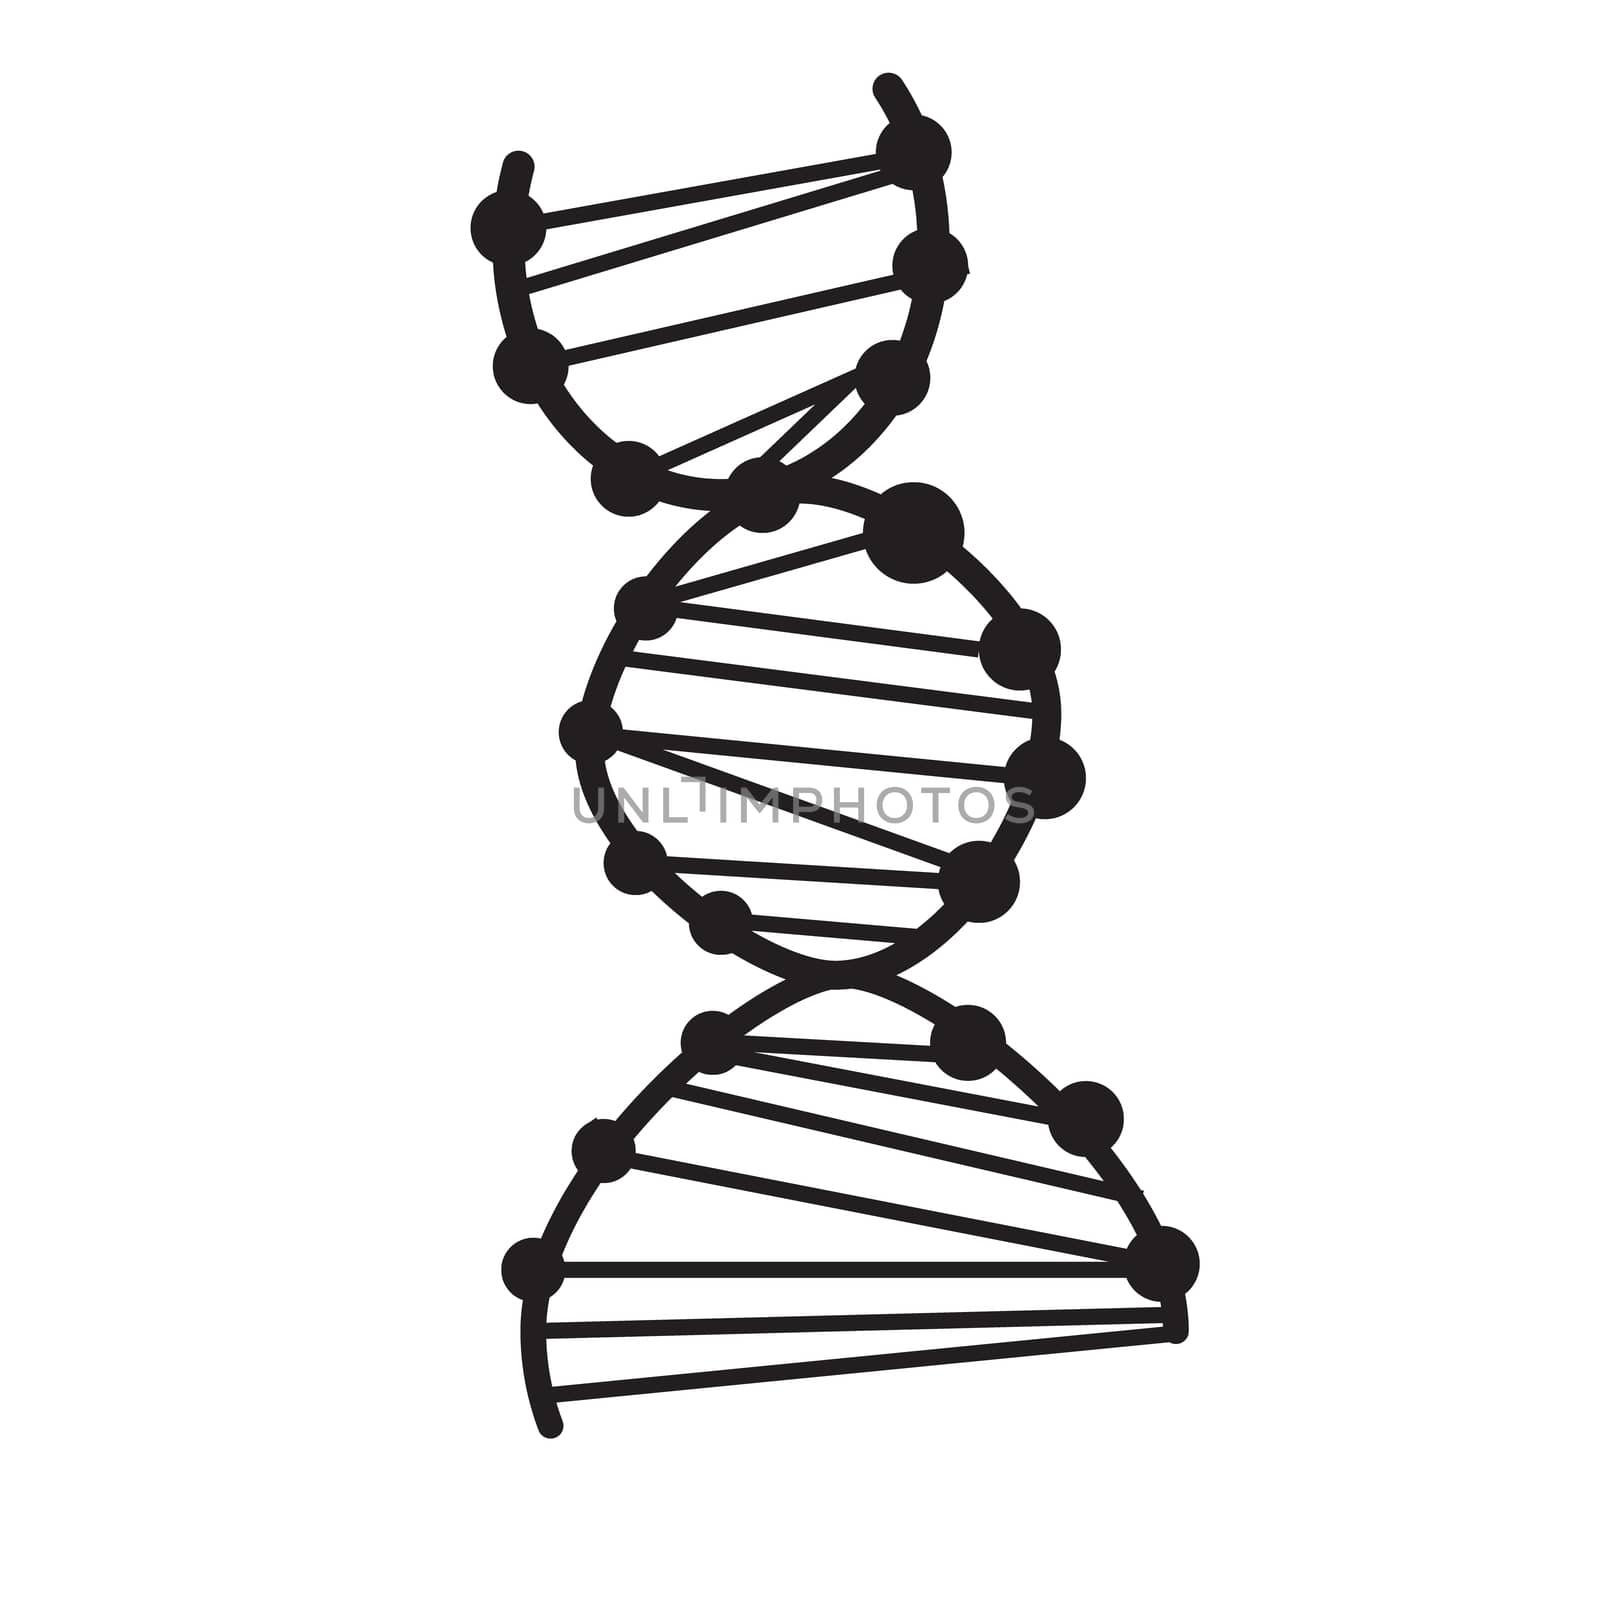 dna icon on white background. dna sign. flat style. dna icon for your web site design, logo, app, UI. 